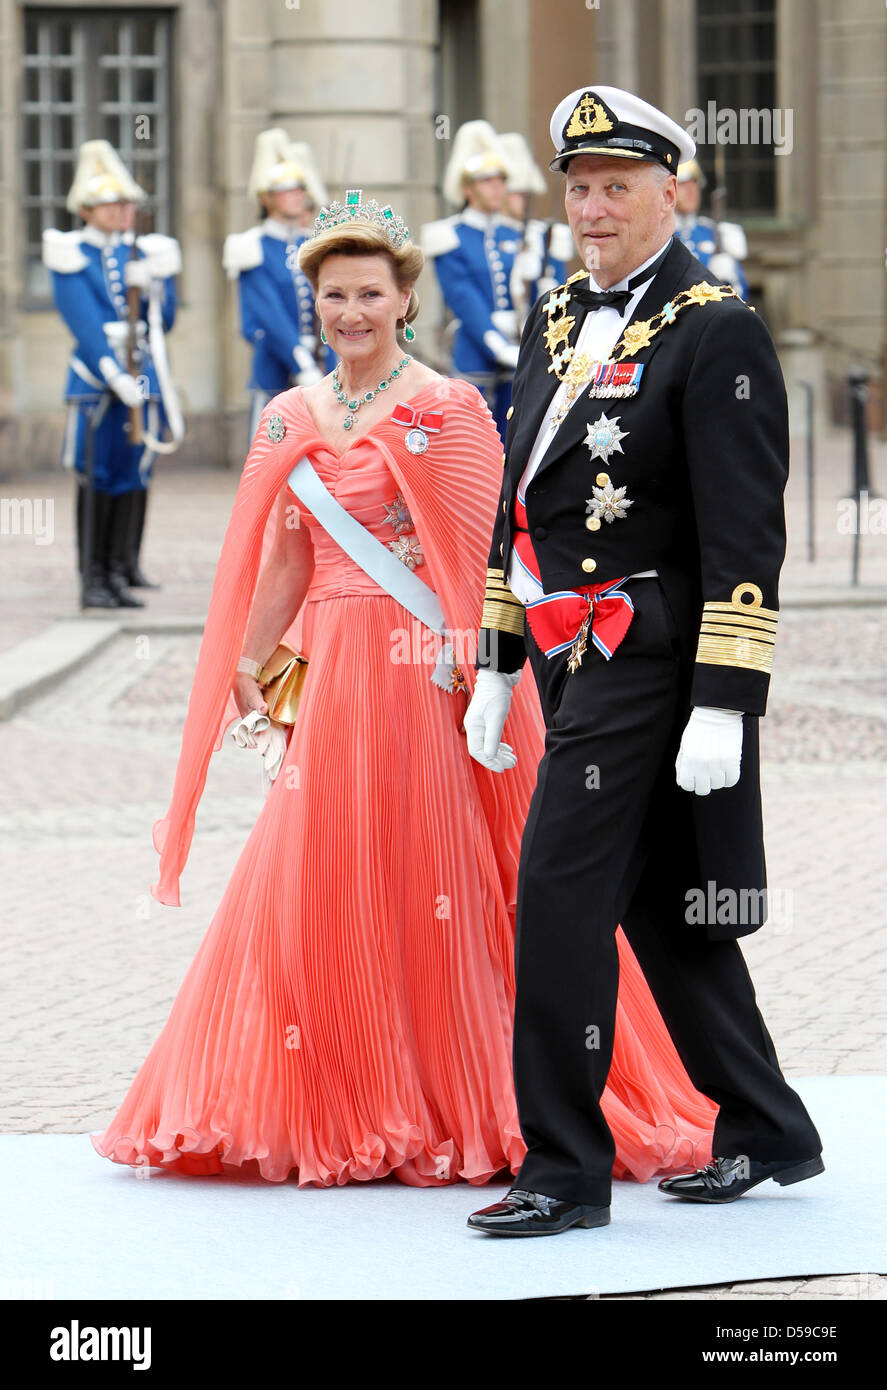 King Harald V Of Norway And Queen Sonja Of Norway Arrive For The